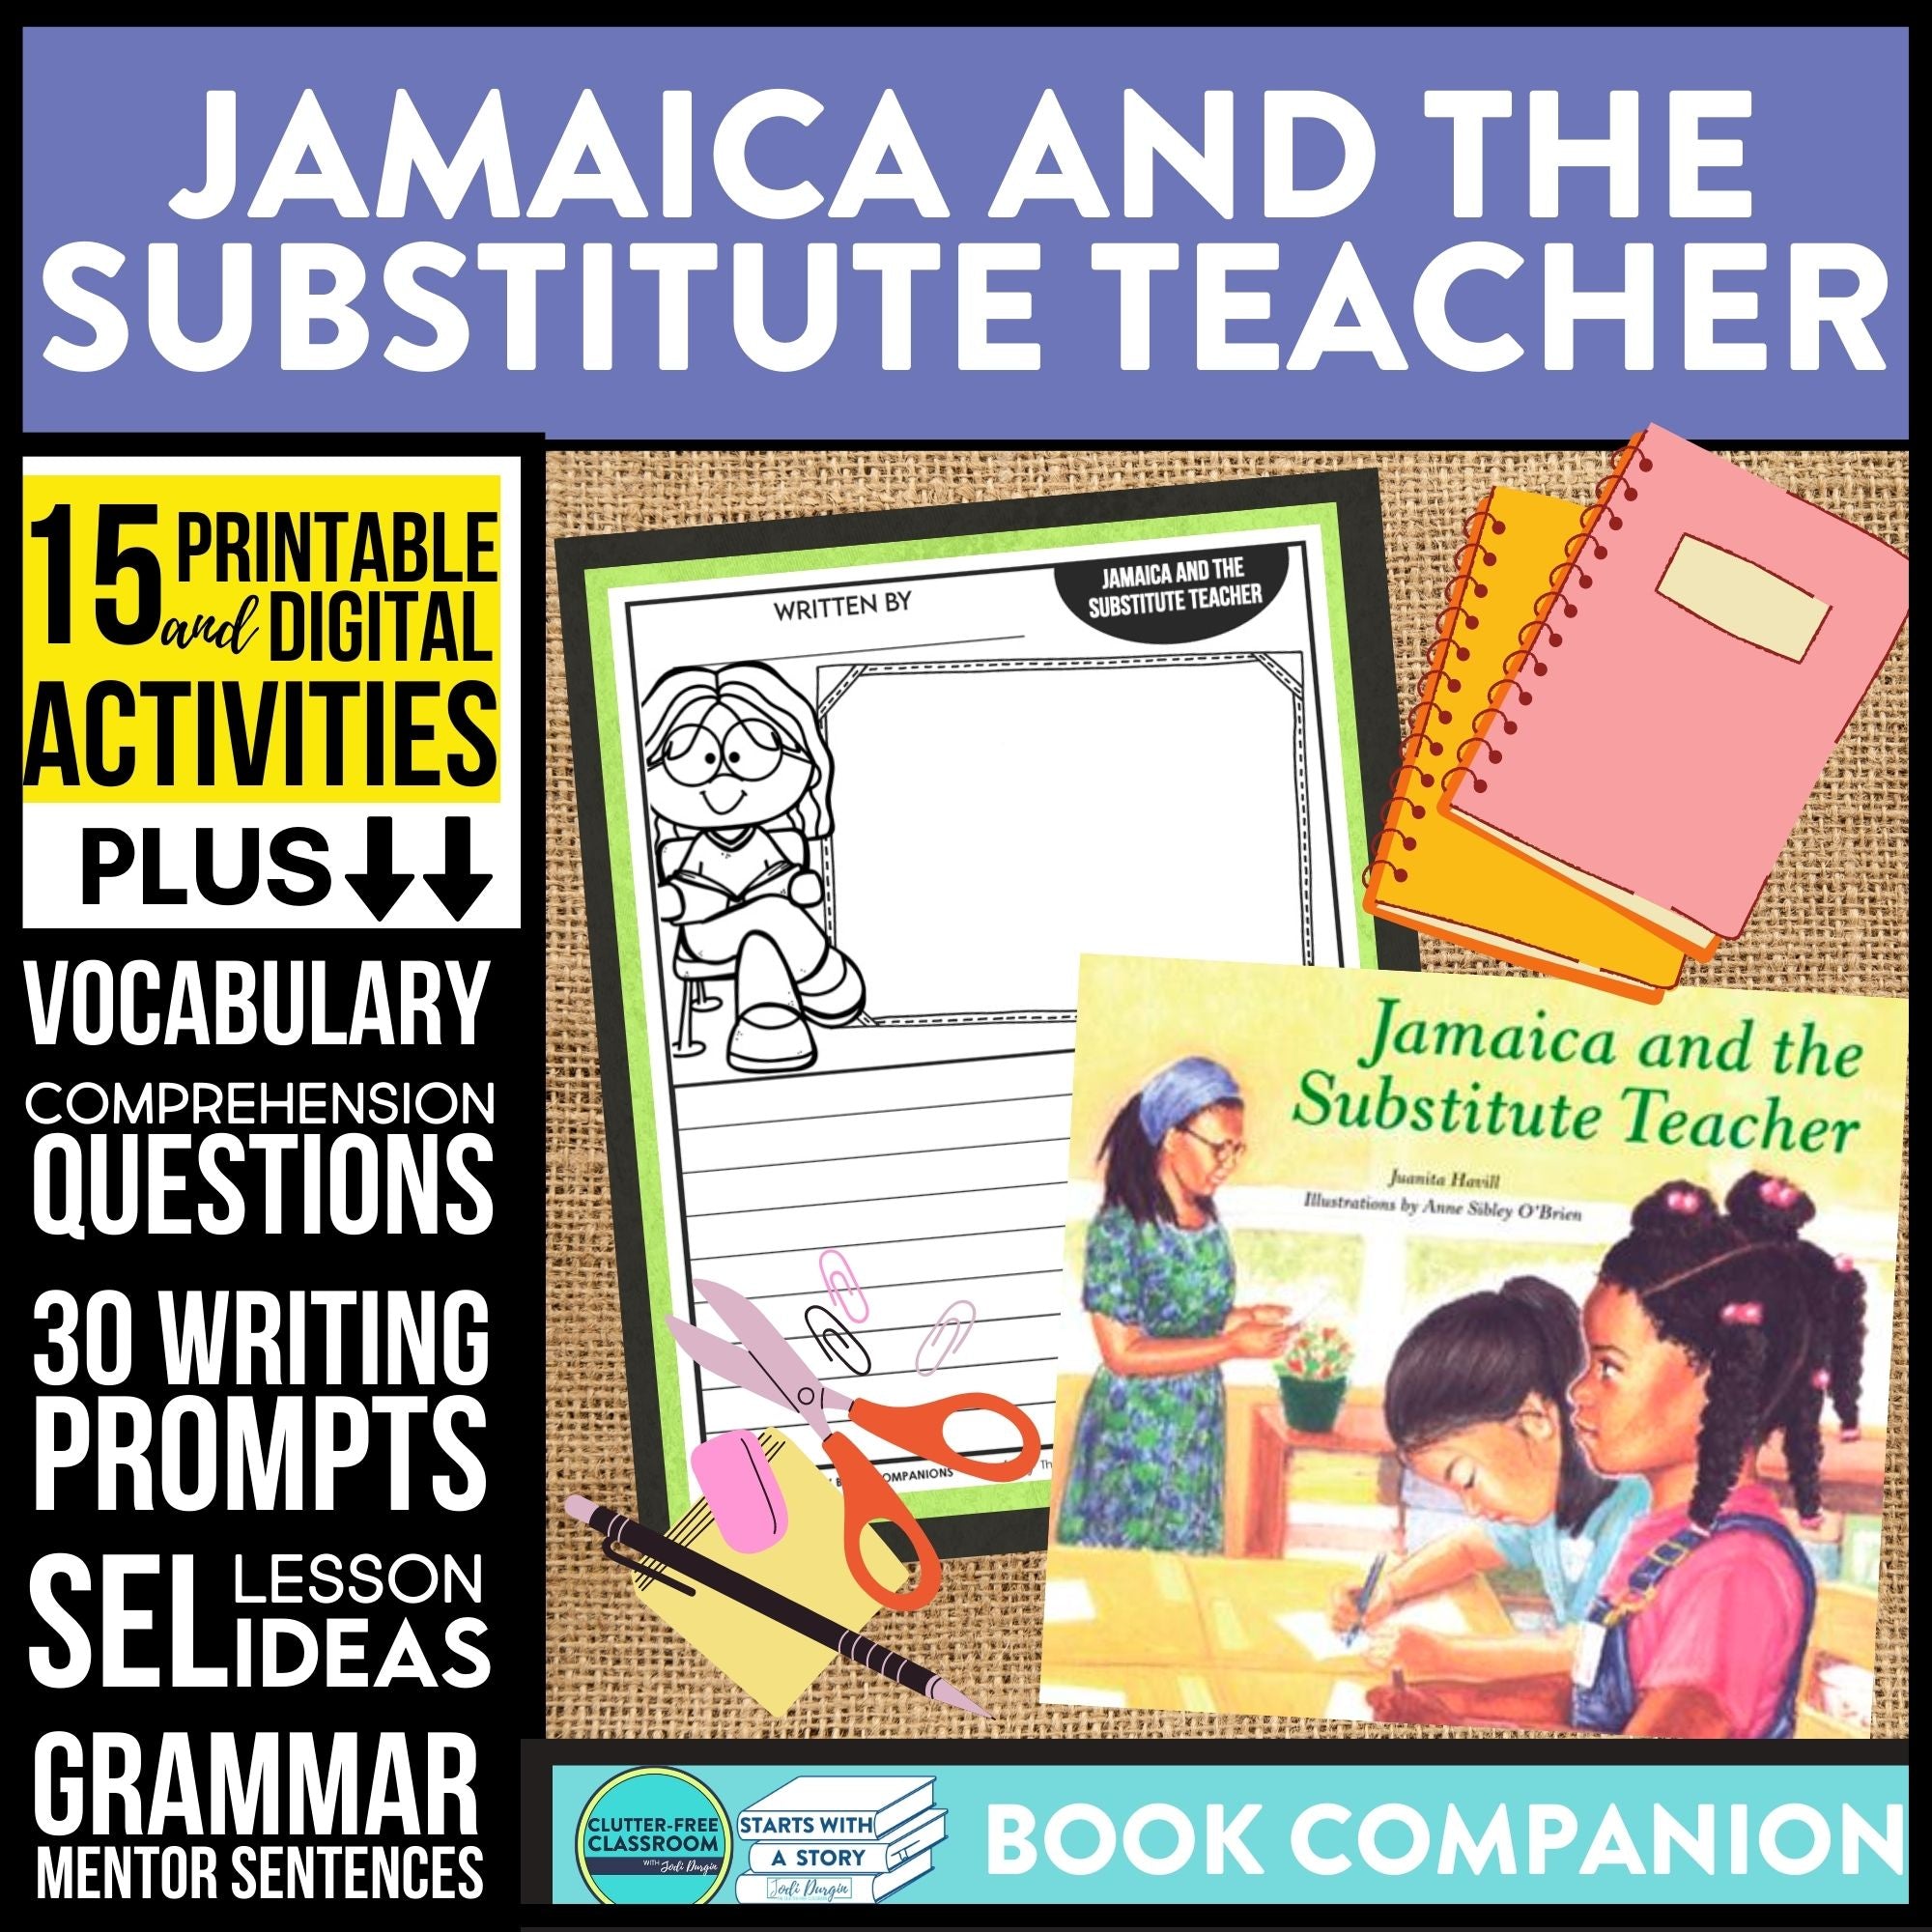 JAMAICA AND THE SUBSTITUTE TEACHER activities and lesson plan ideas